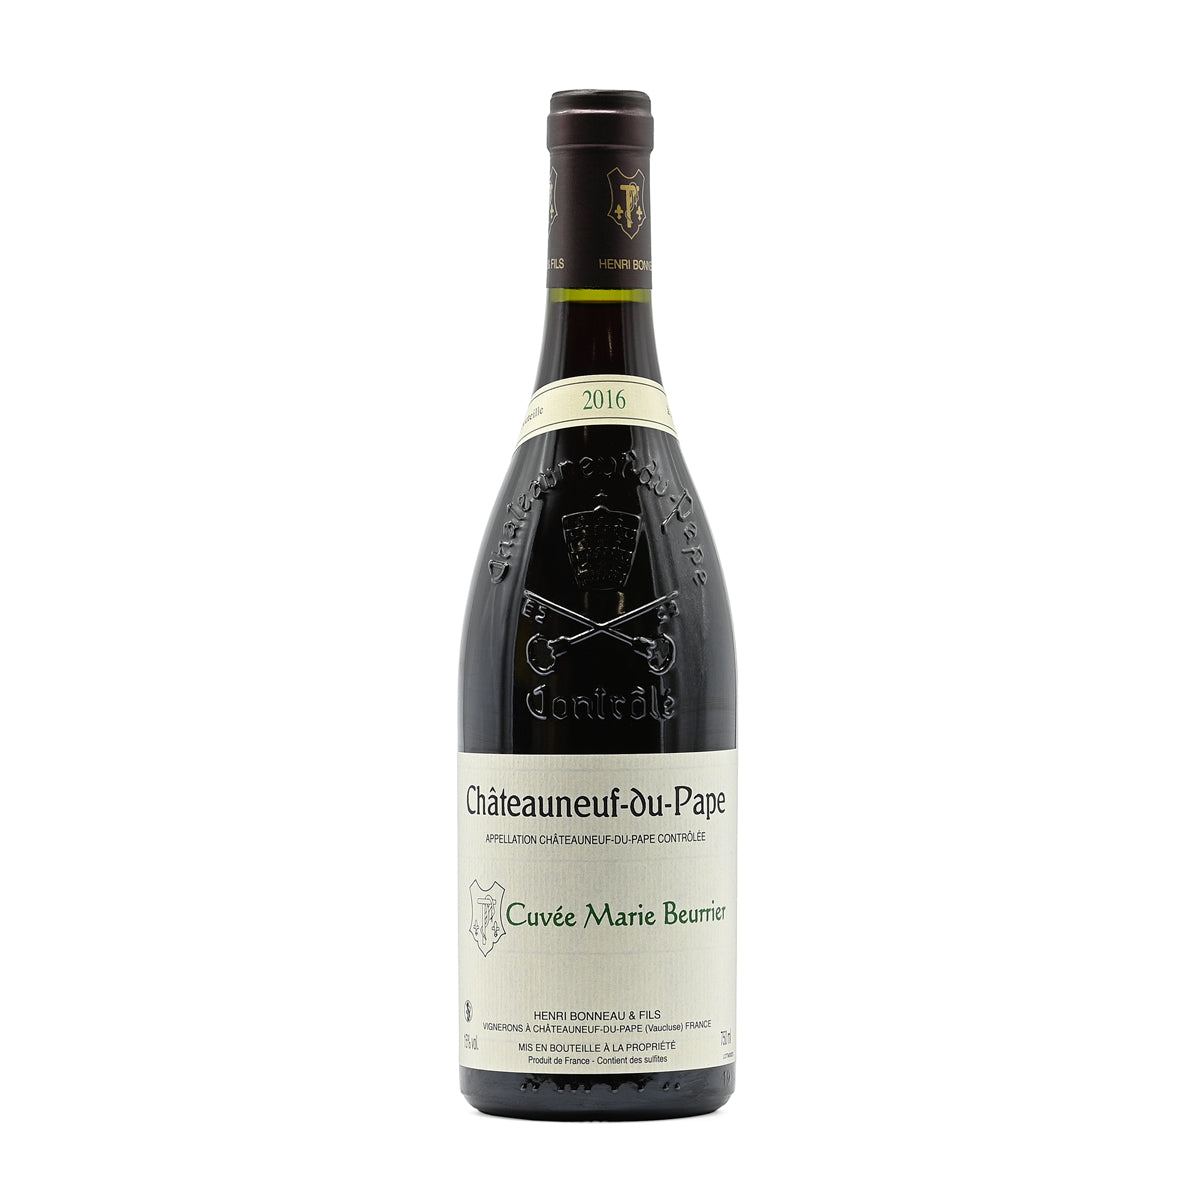 Henri Bonneau Chateauneuf-du-Pape Cuvee Marie Beurrier 2016, 750ml French red wine, from Chateauneuf-du-Pape, Southern Rhone, France – GDV Fine Wines, Hong Kong